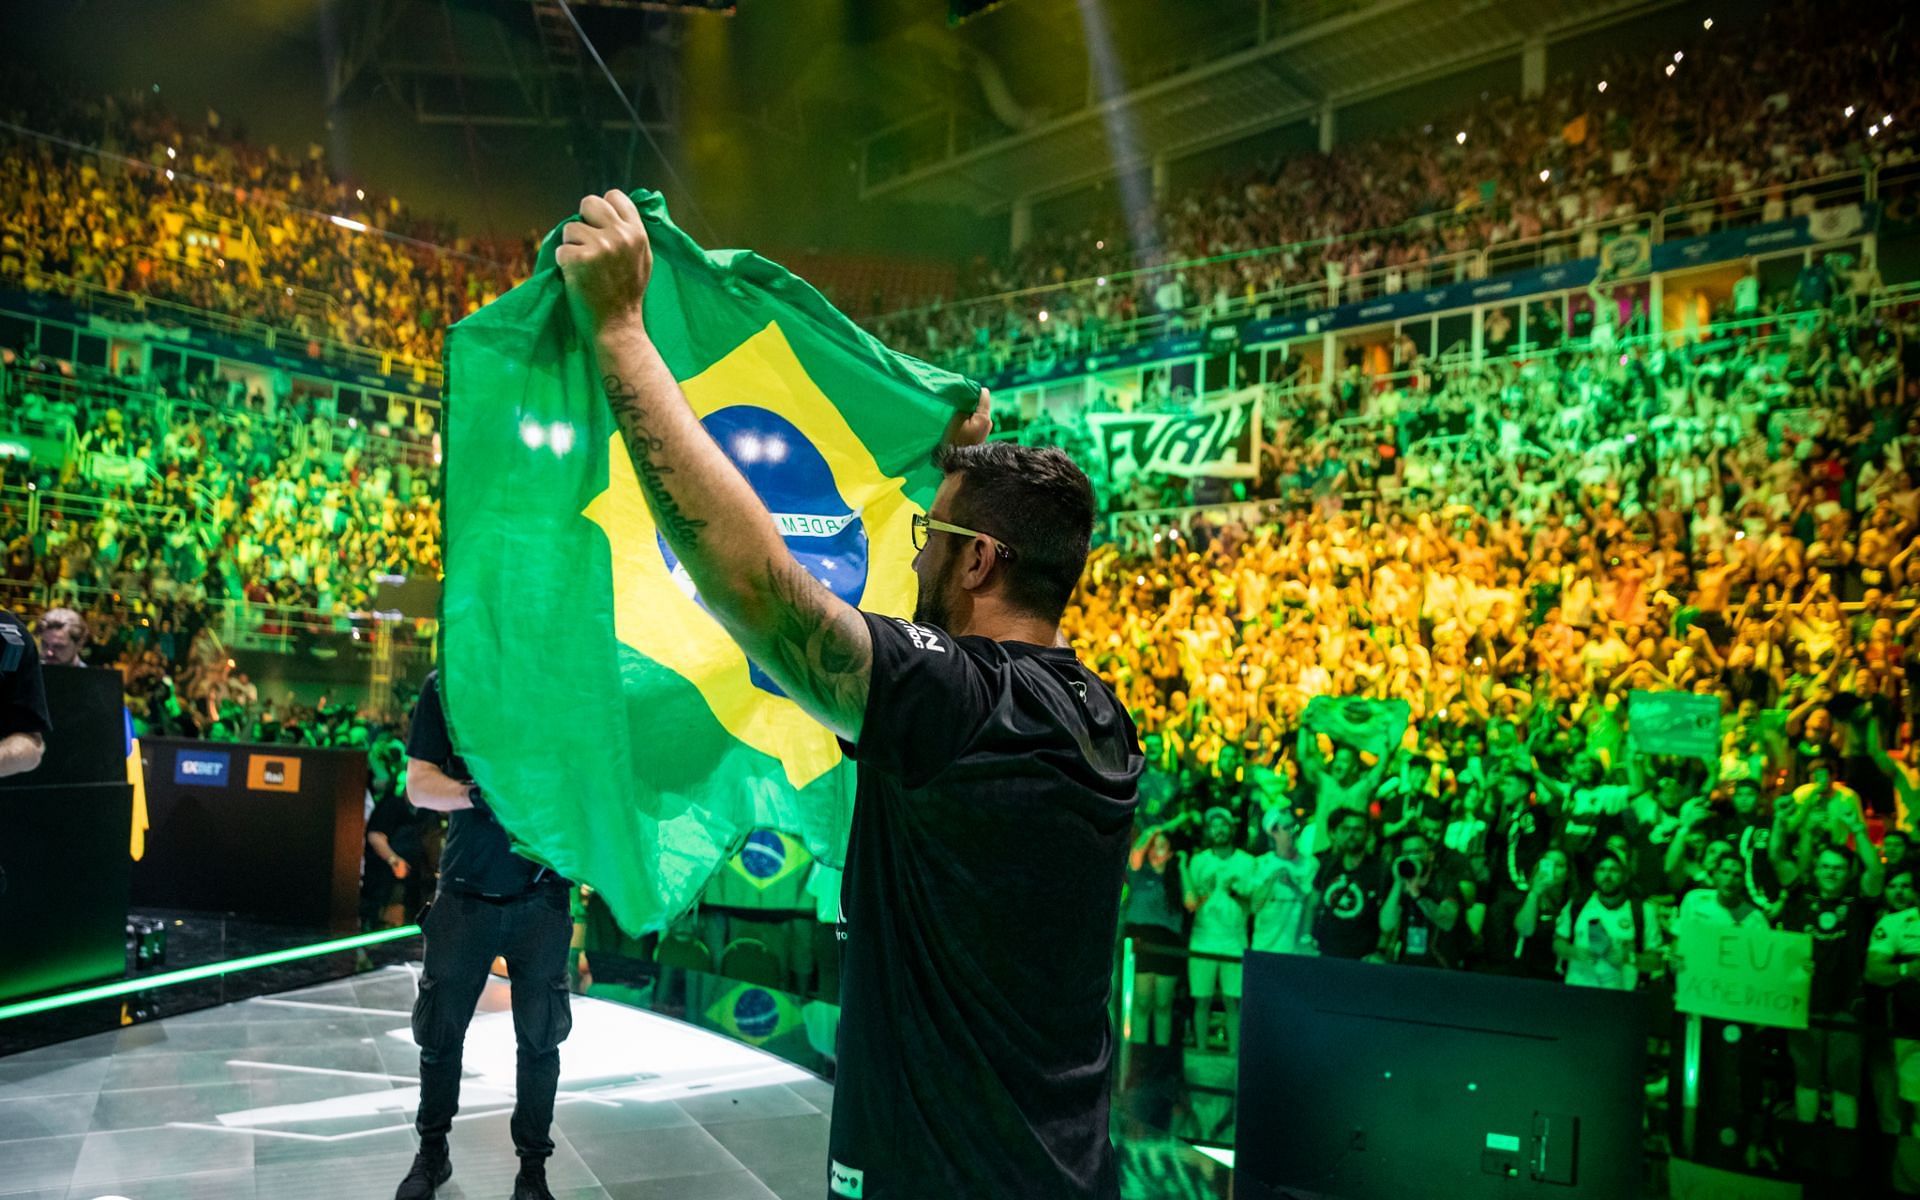 At Counter-Strike Rio Major, Brazil's fans take cheering to a new level -  The Washington Post